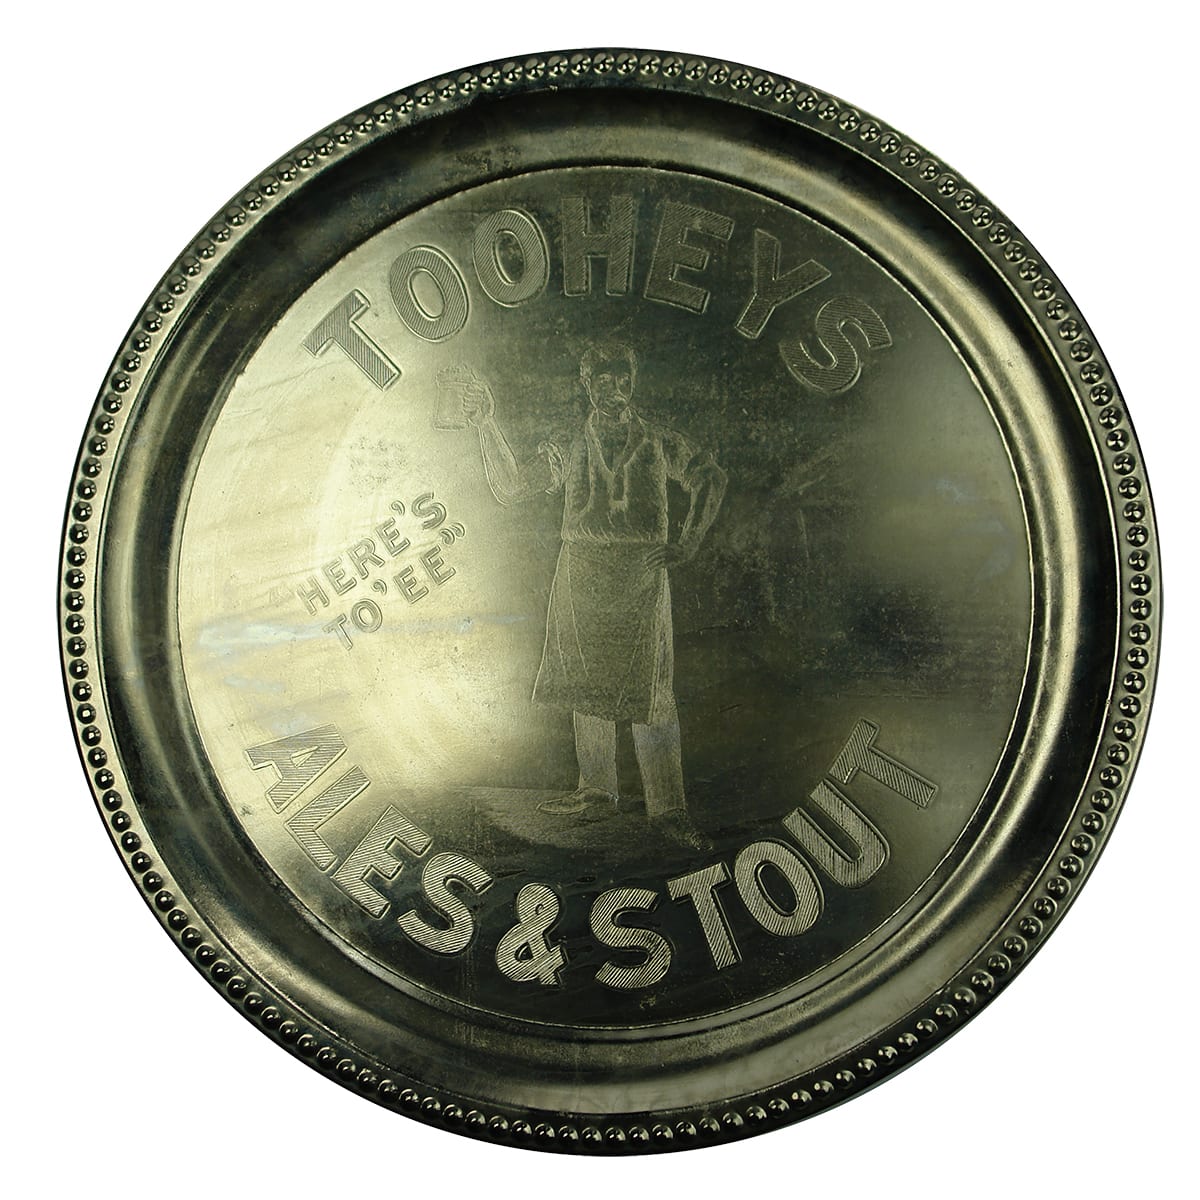 Advertising Serving Tray. Tooheys Ales & Stout. Plated with etched design. (Sydney, New South Wales)